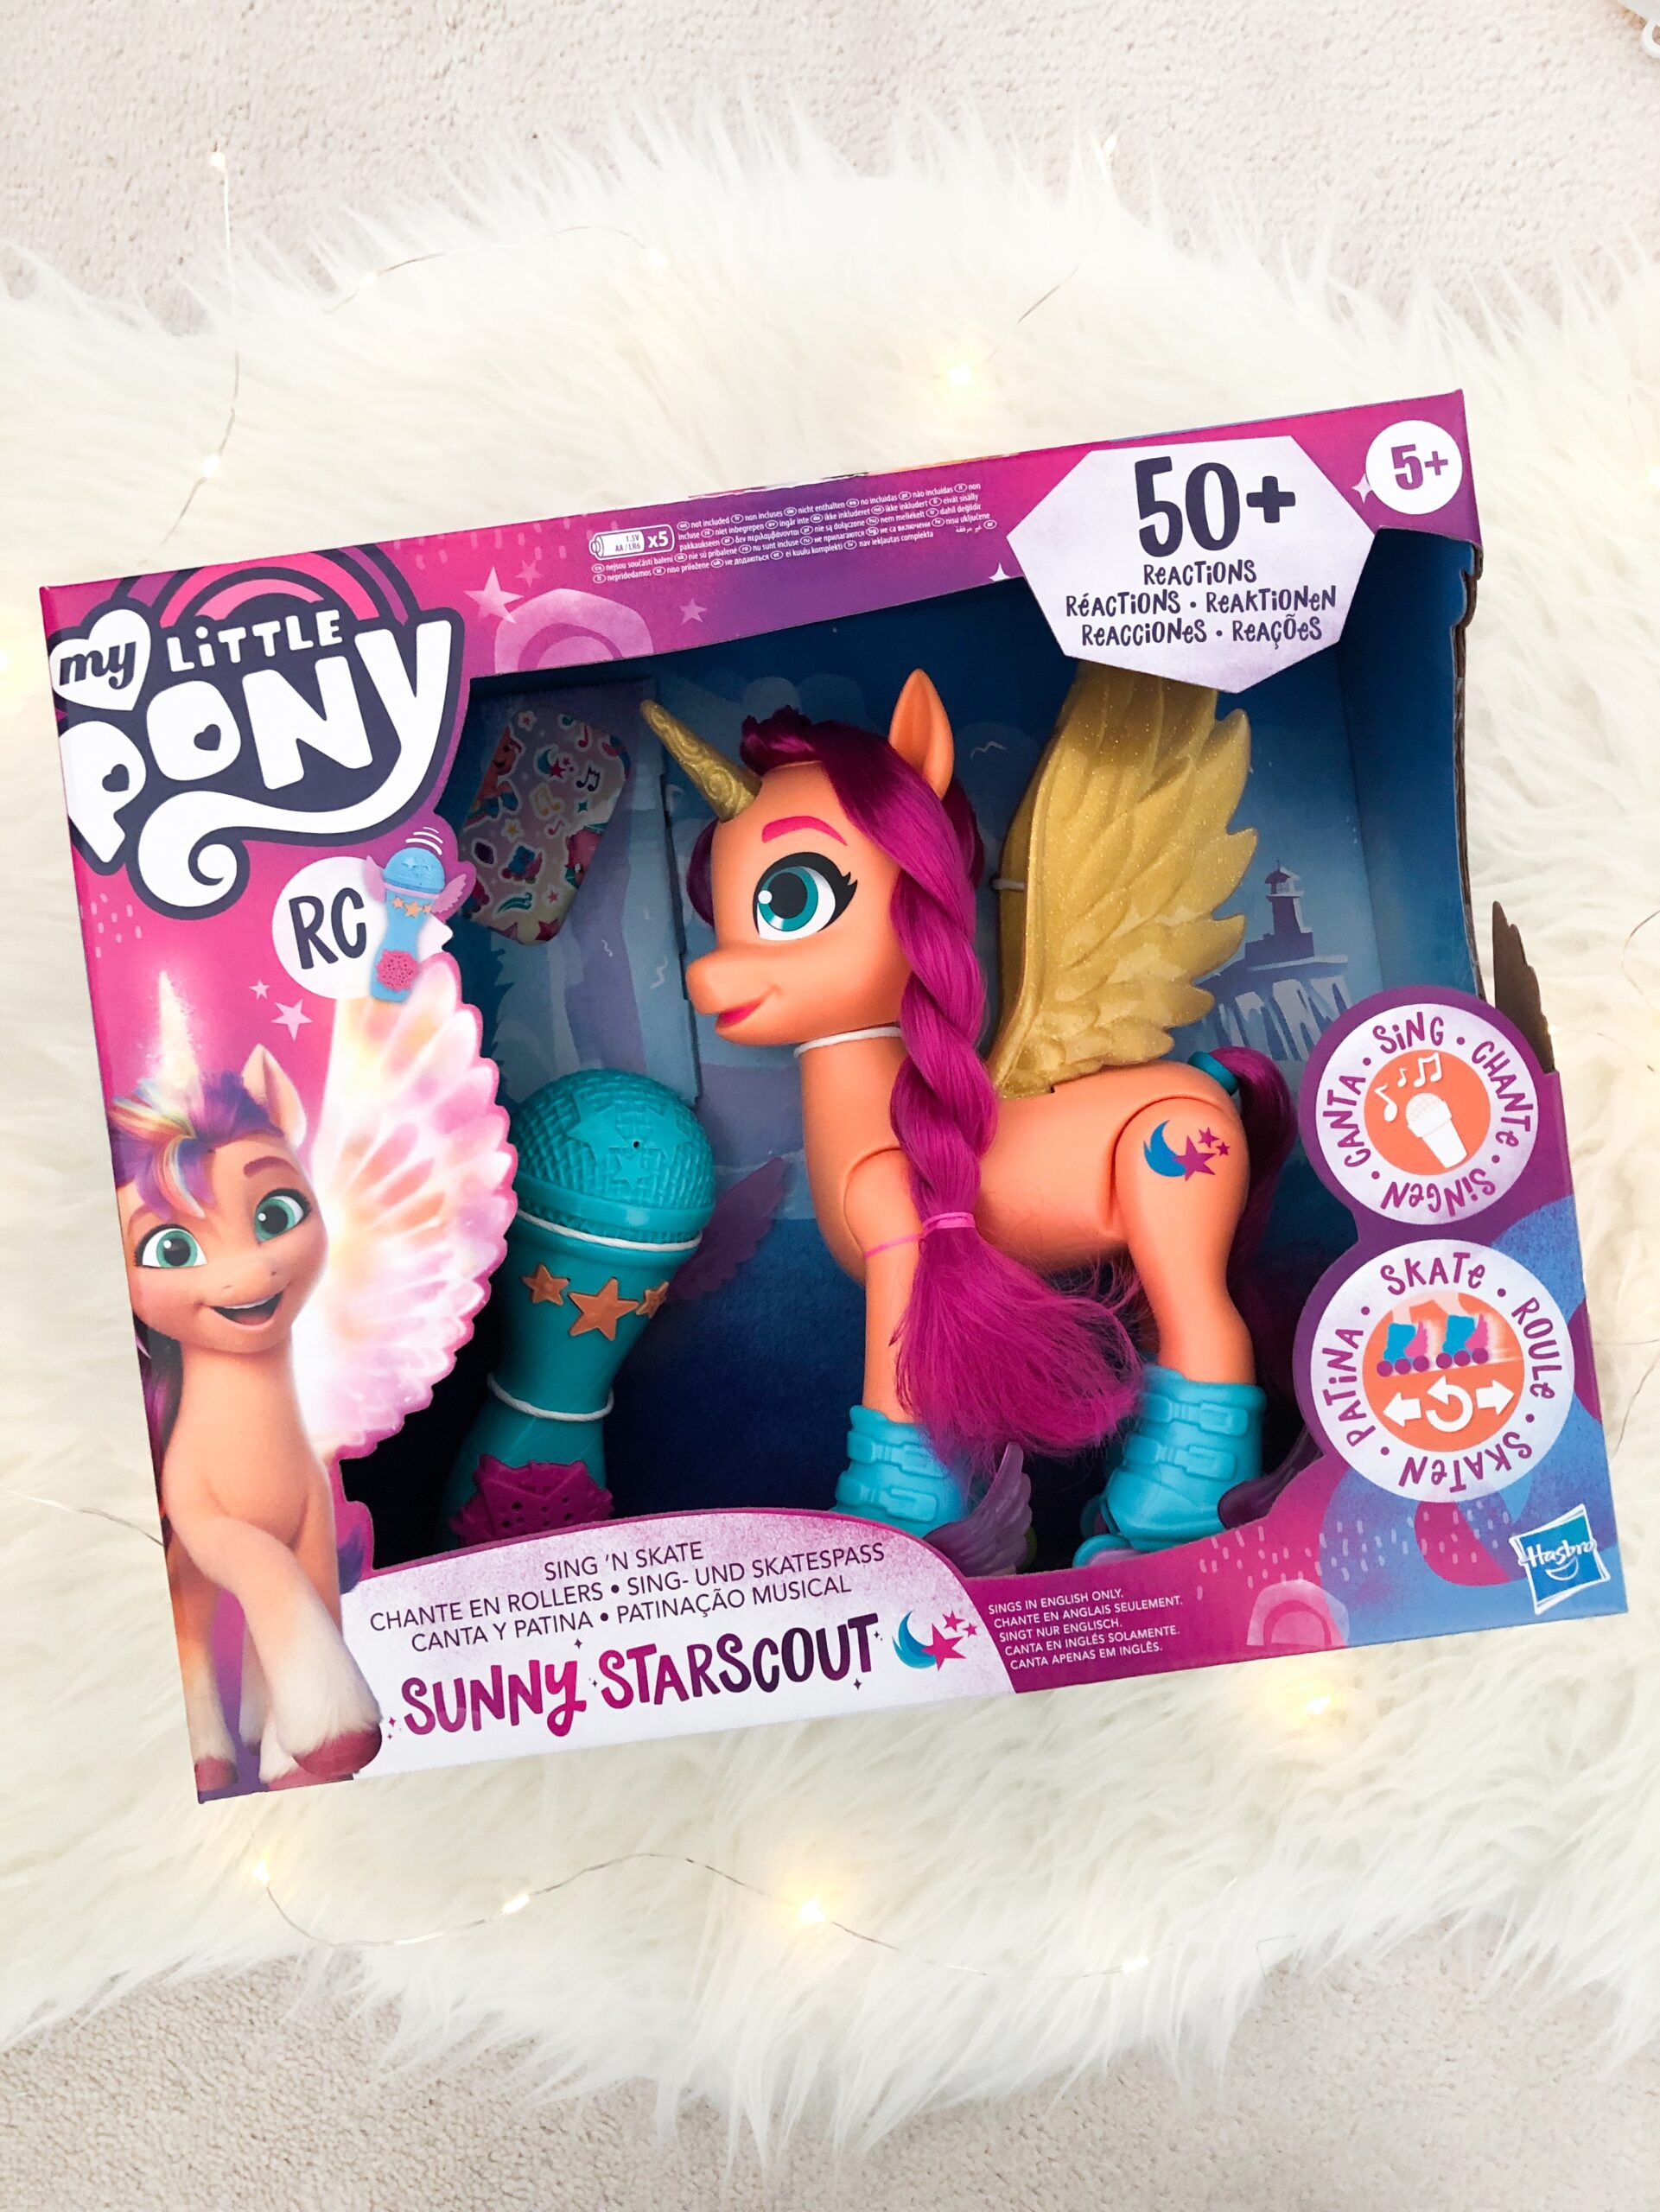 Hasbro Gift Guide for Kids on livin' Life with Style- my little pony